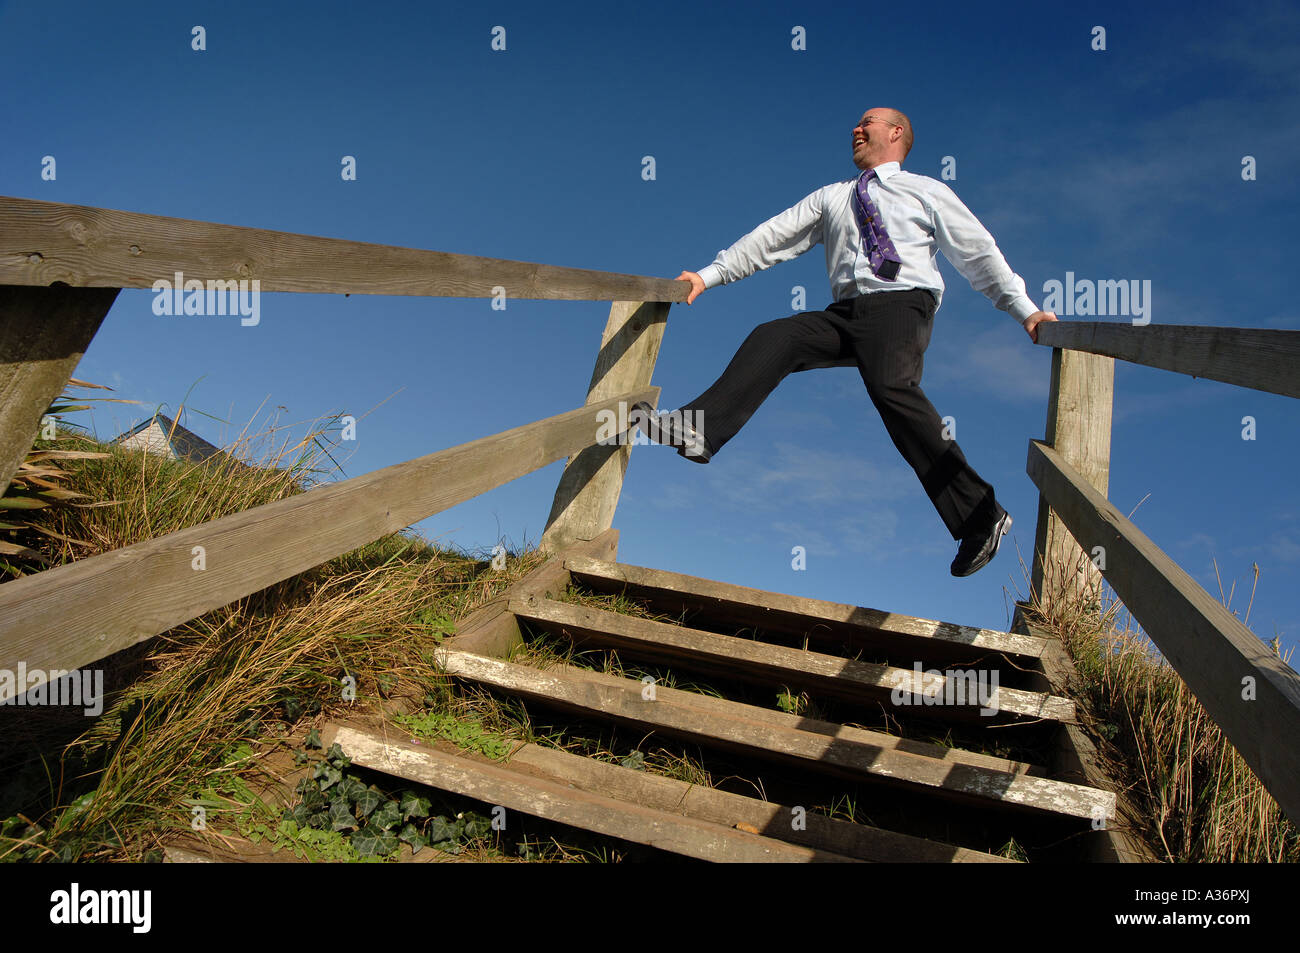 a man in a suit standing at the top of a set of stairs with a clear blue sky behind Stock Photo